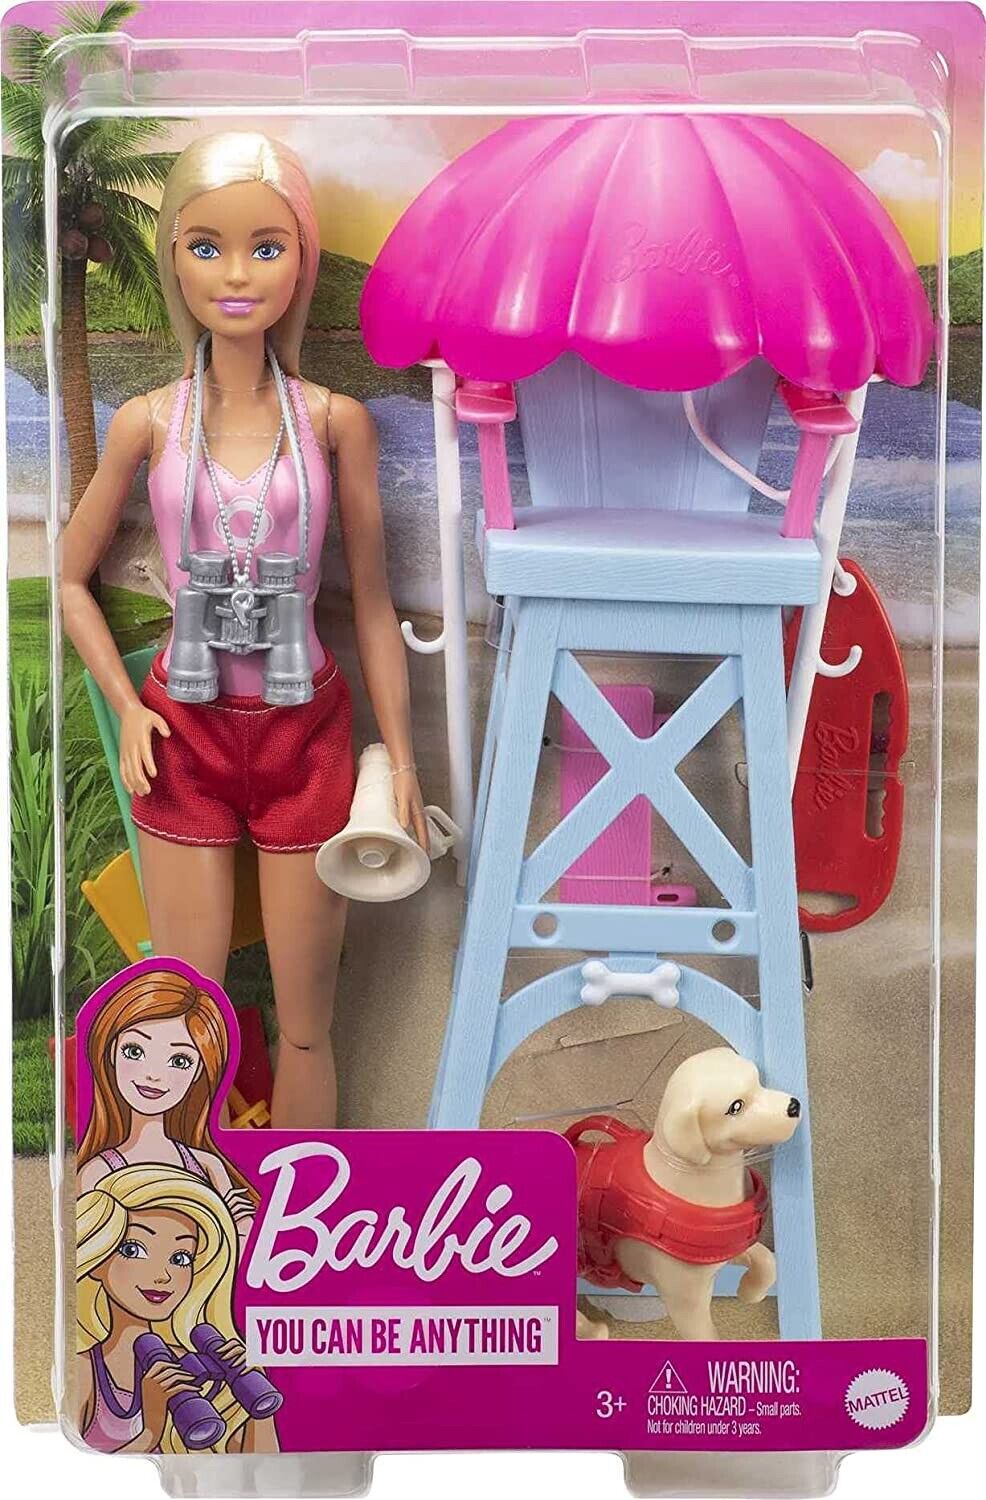 Barbie Lifeguard “You Can Be Anything” Playset Blonde Doll With Dog New